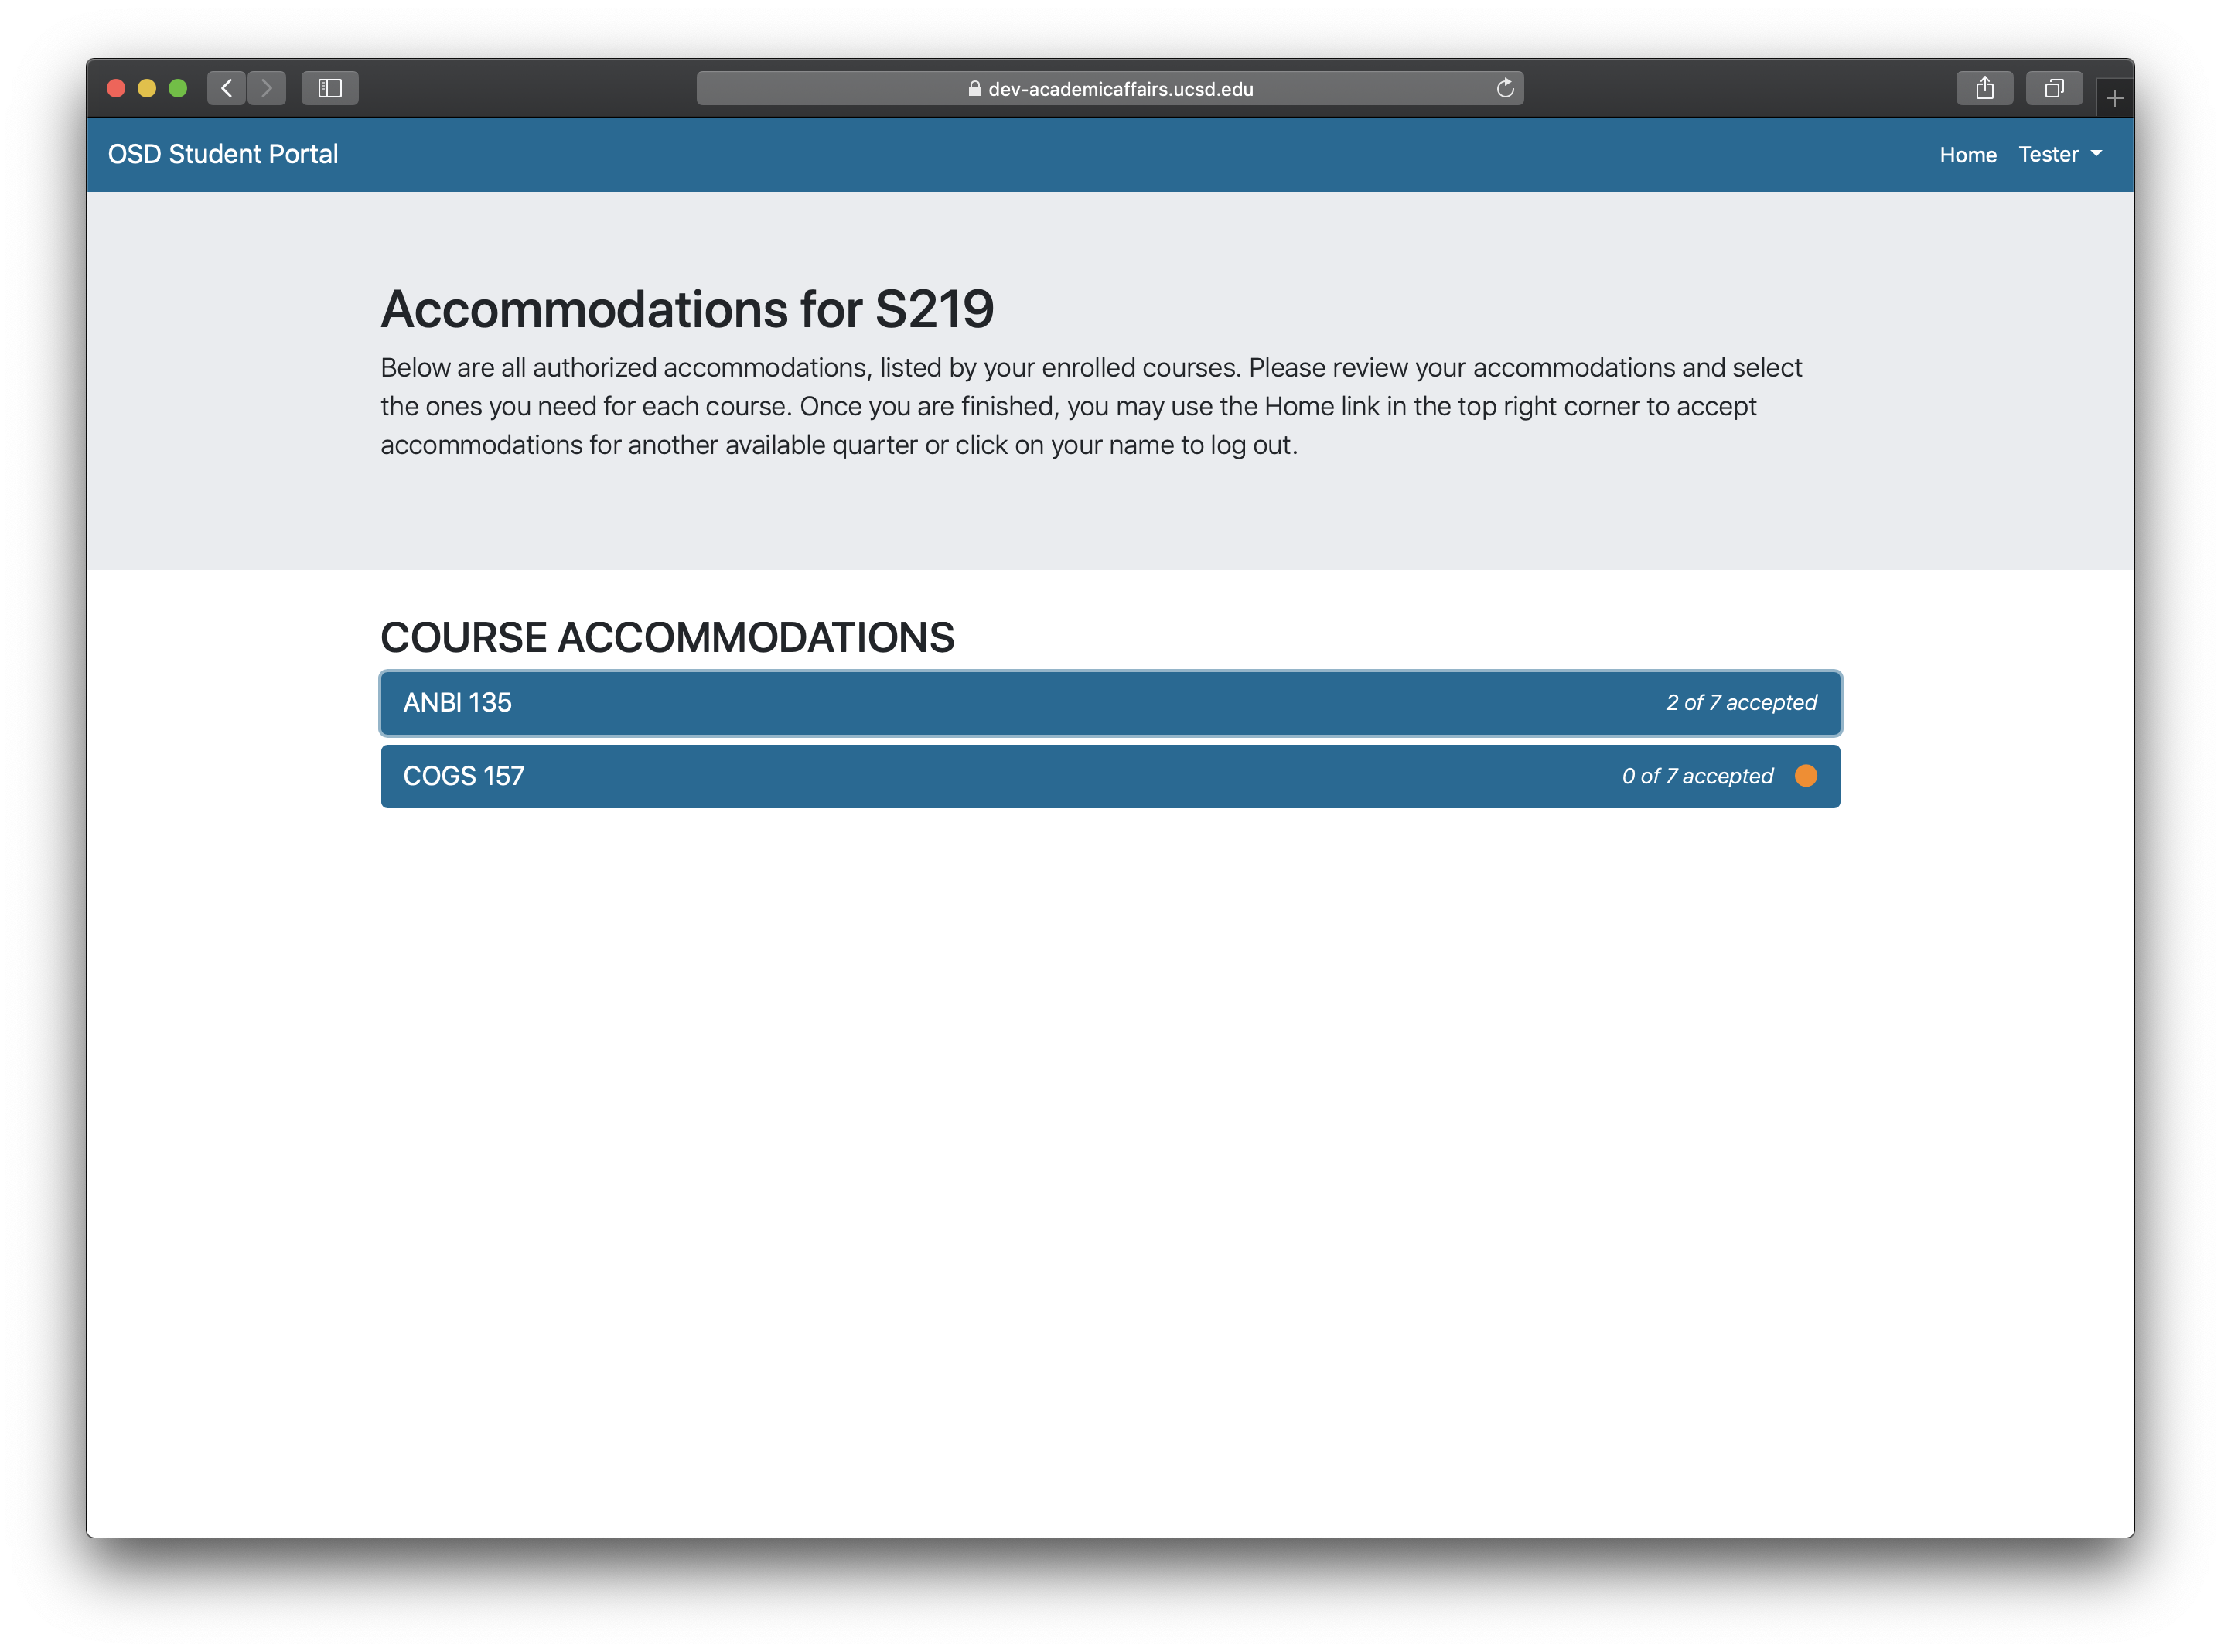 Screenshot of a list of enrolled courses for a quarter, along with instructions on how to accept accommodations.